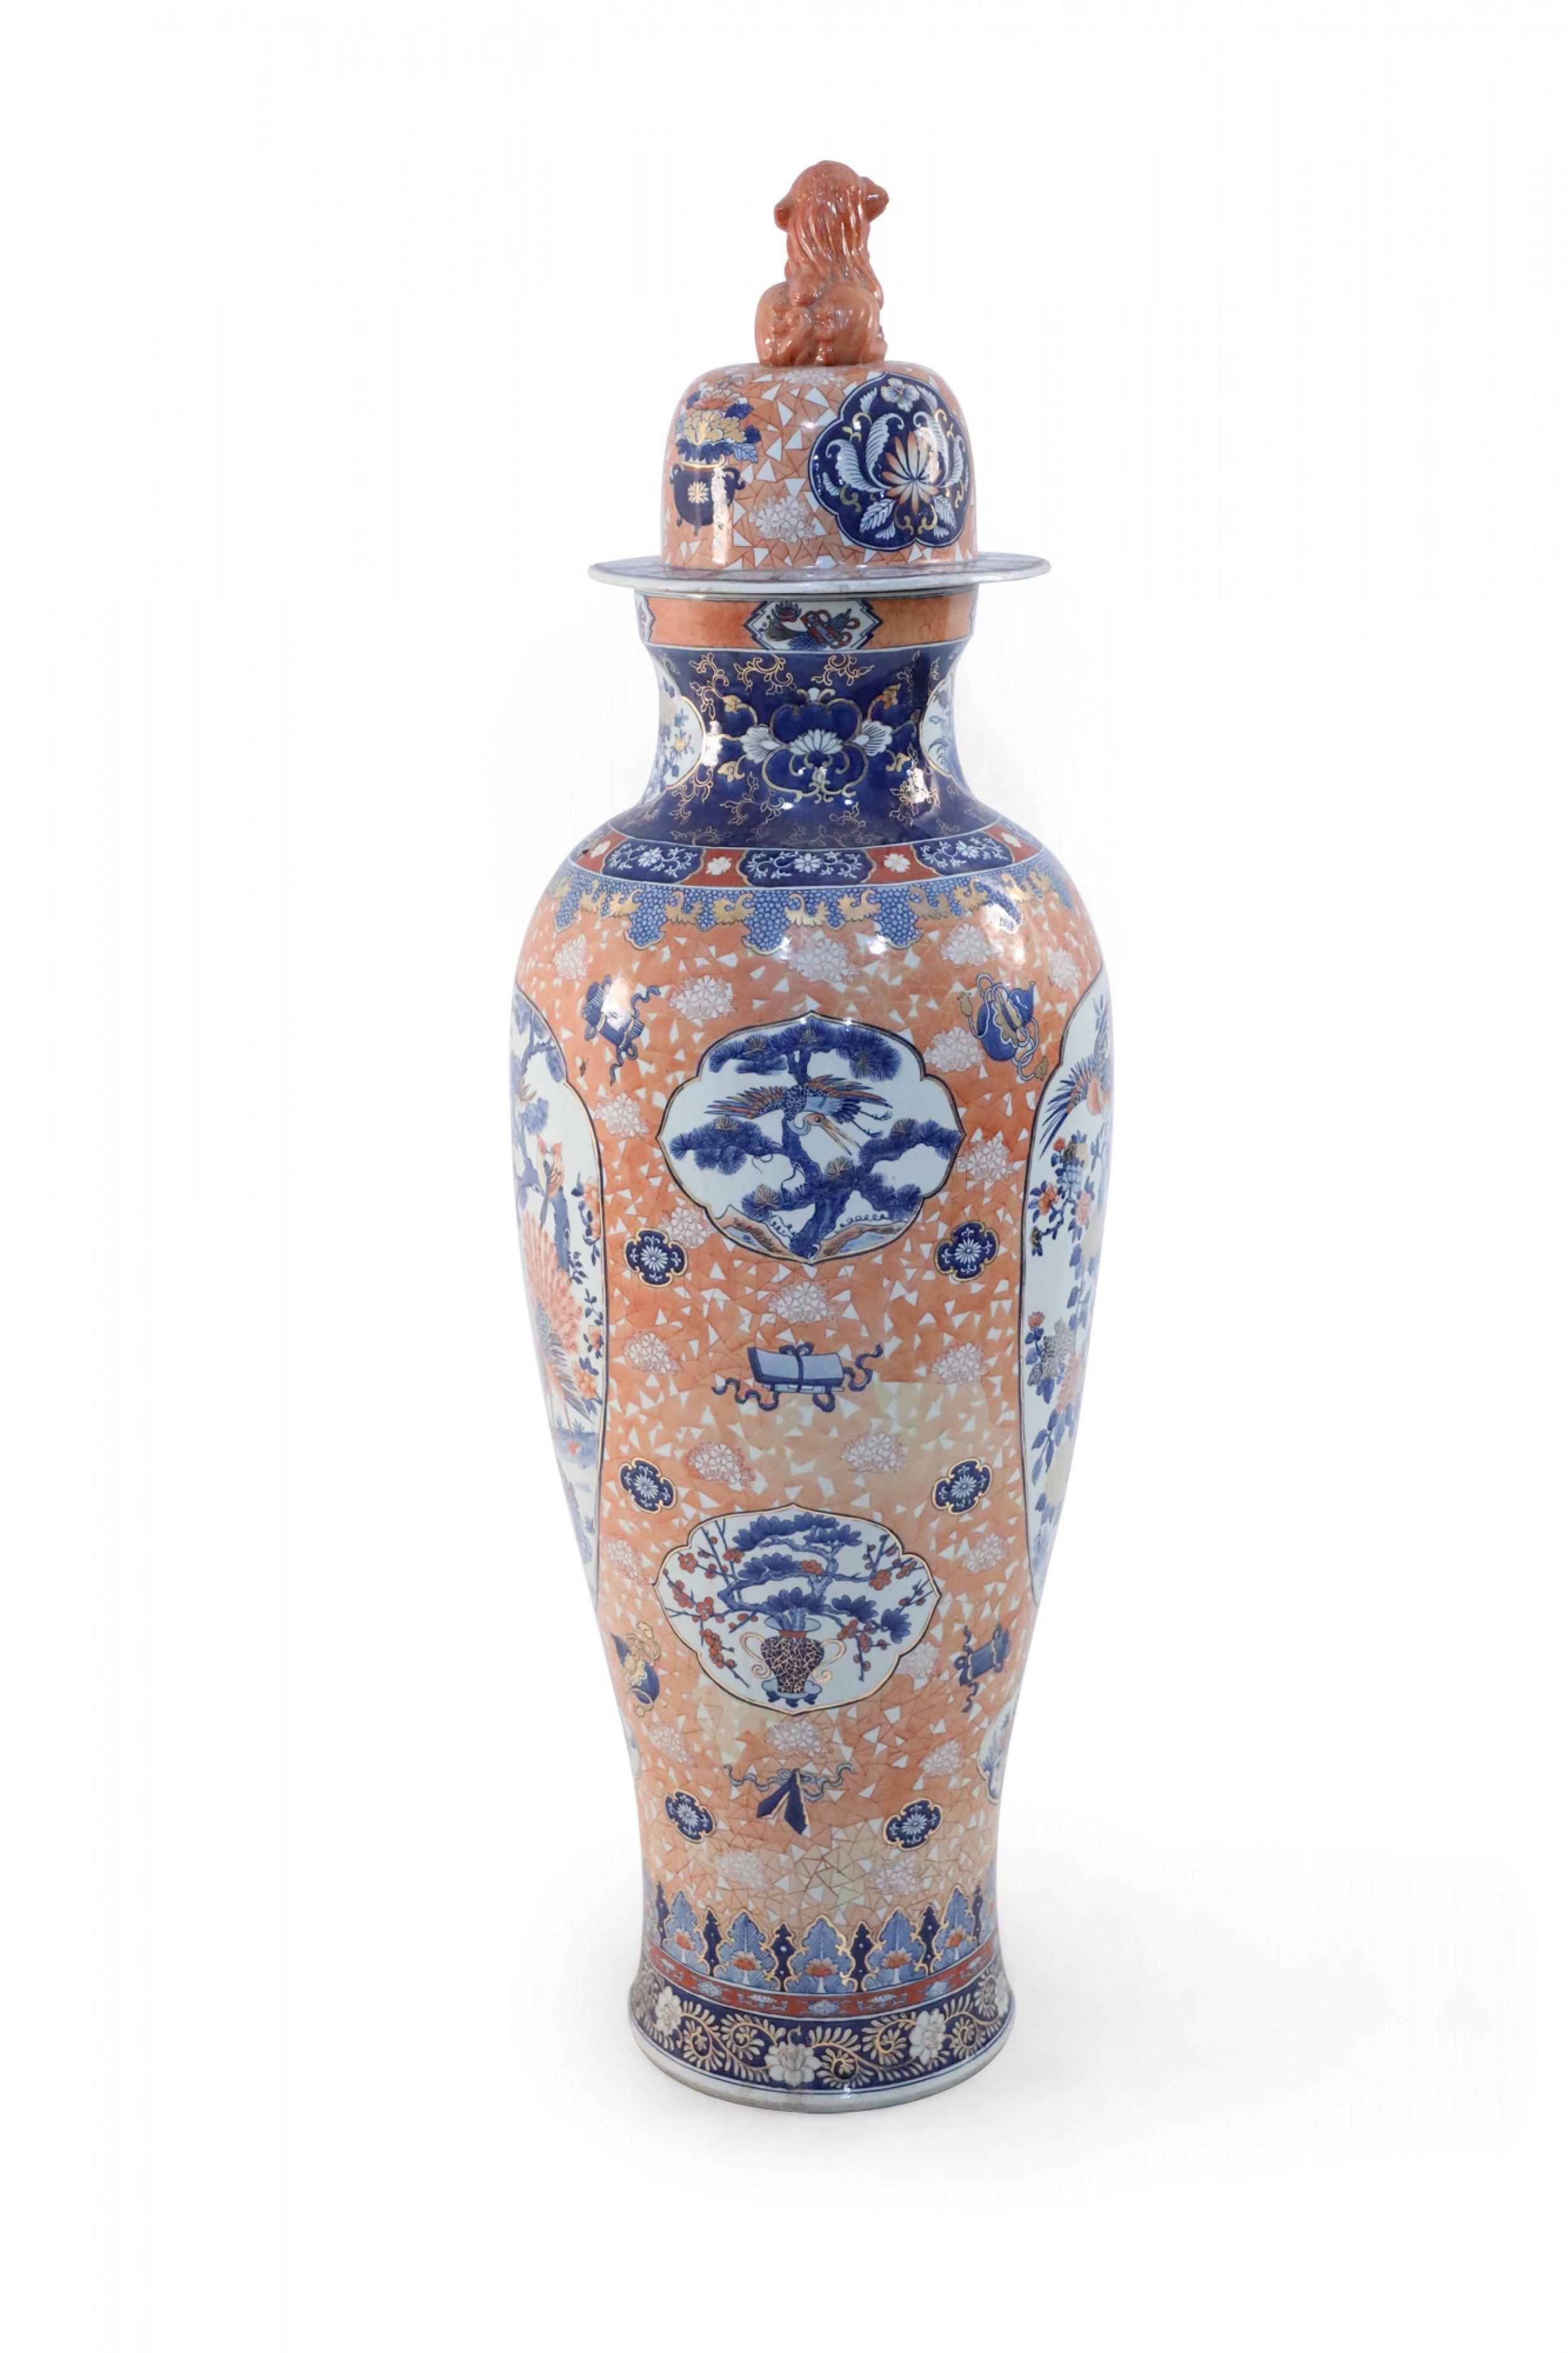 Chinese monumental, lidded porcelain urn celebrating Japanese Imari ware in both palette and design, featuring natural scenes of birds and flowering trees set against a light-orange, geometric-patterned background, and topped with a foo dog-finial